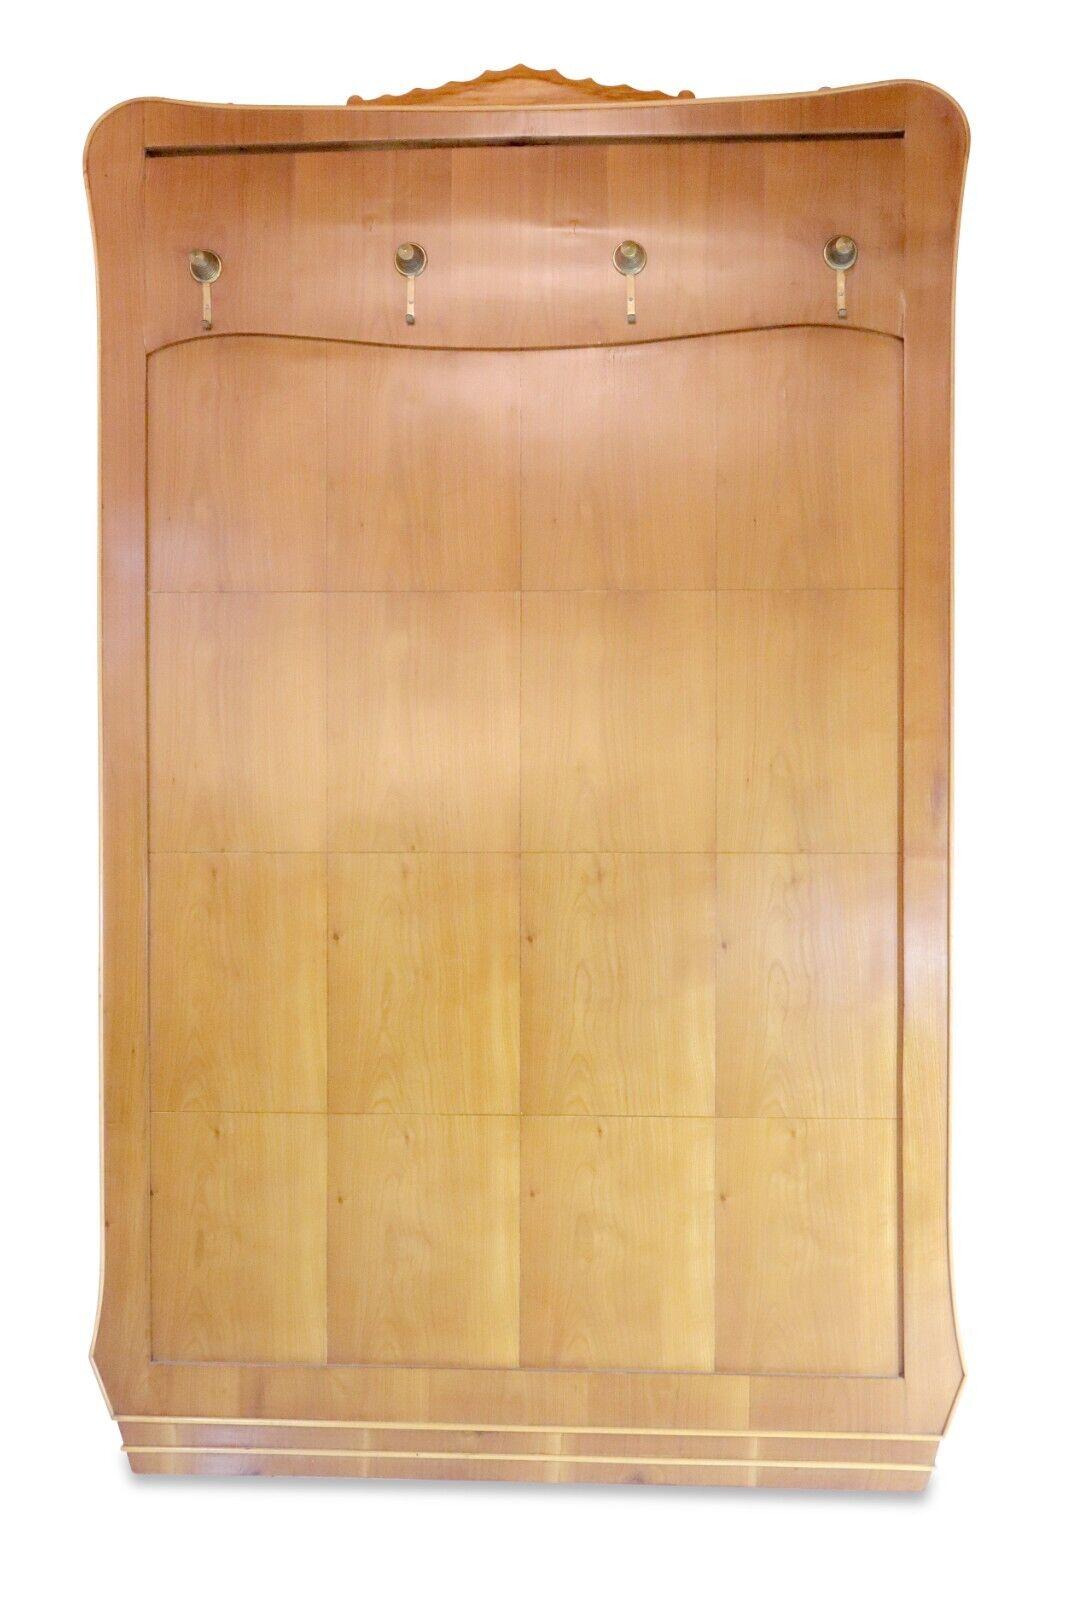 Unknown Italian Cherry Wall Panel / Coat Rack with Brass Hooks, 1950's For Sale